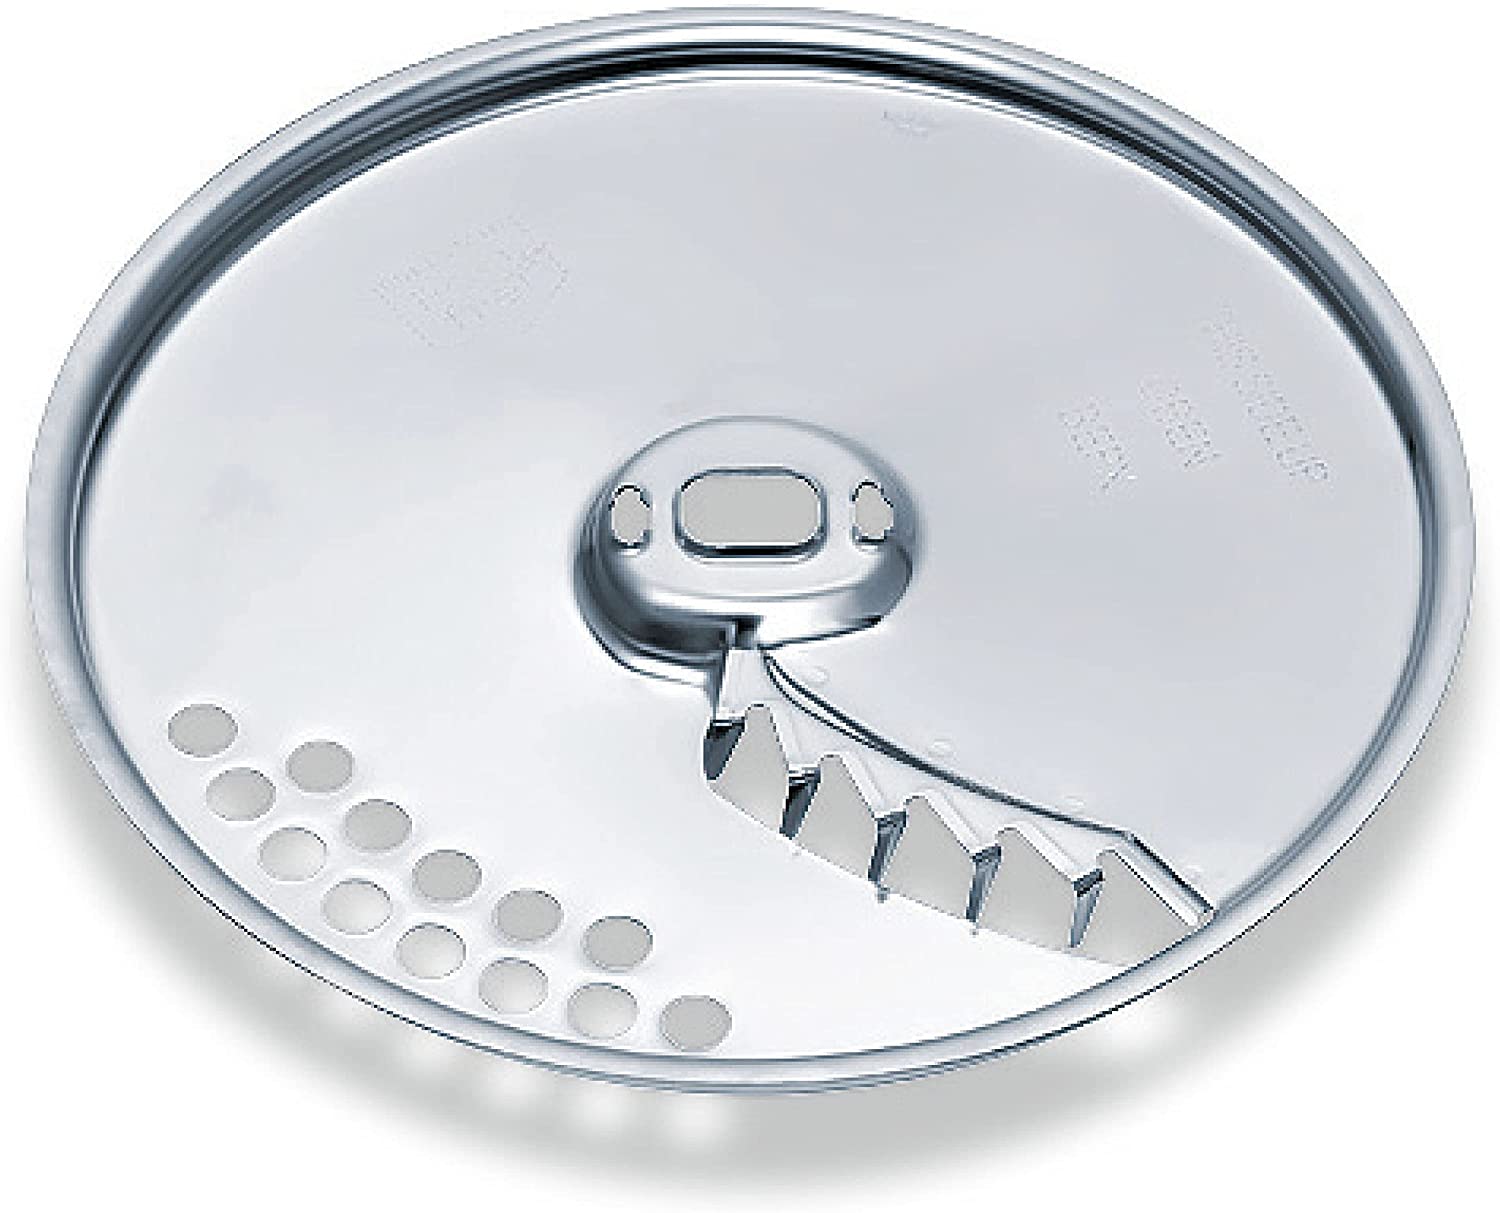 Bosch Hausgerate Bosch MUZ45PS1 French fries disc made of stainless steel / for continuous slicers for Bosch kitchen machines MUM4 ... MUM5 ...